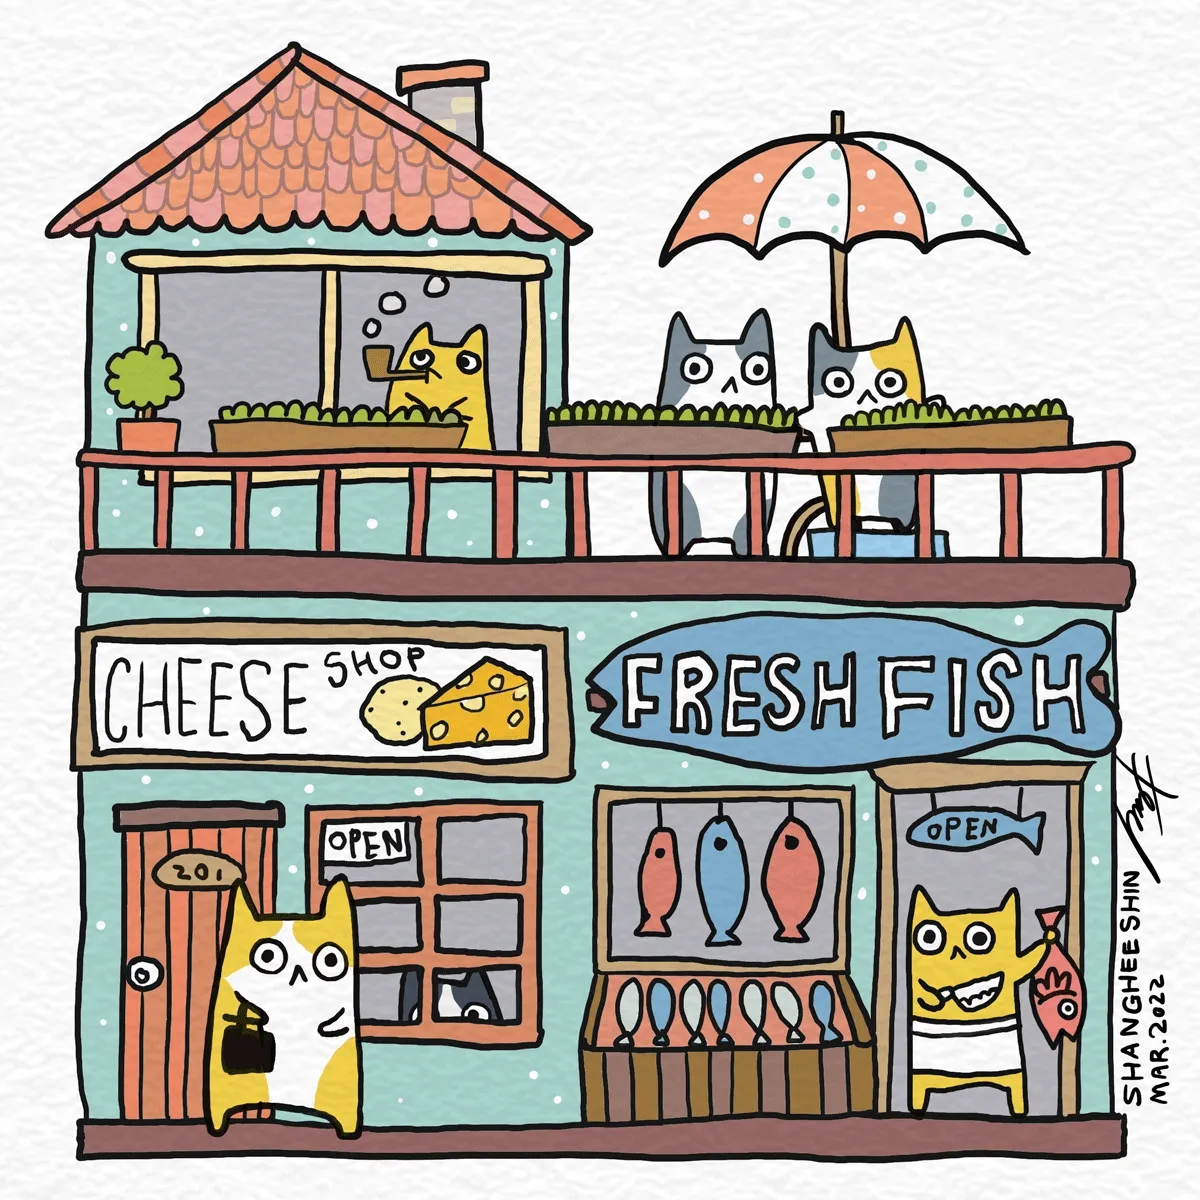 The Cheese and Fish shop